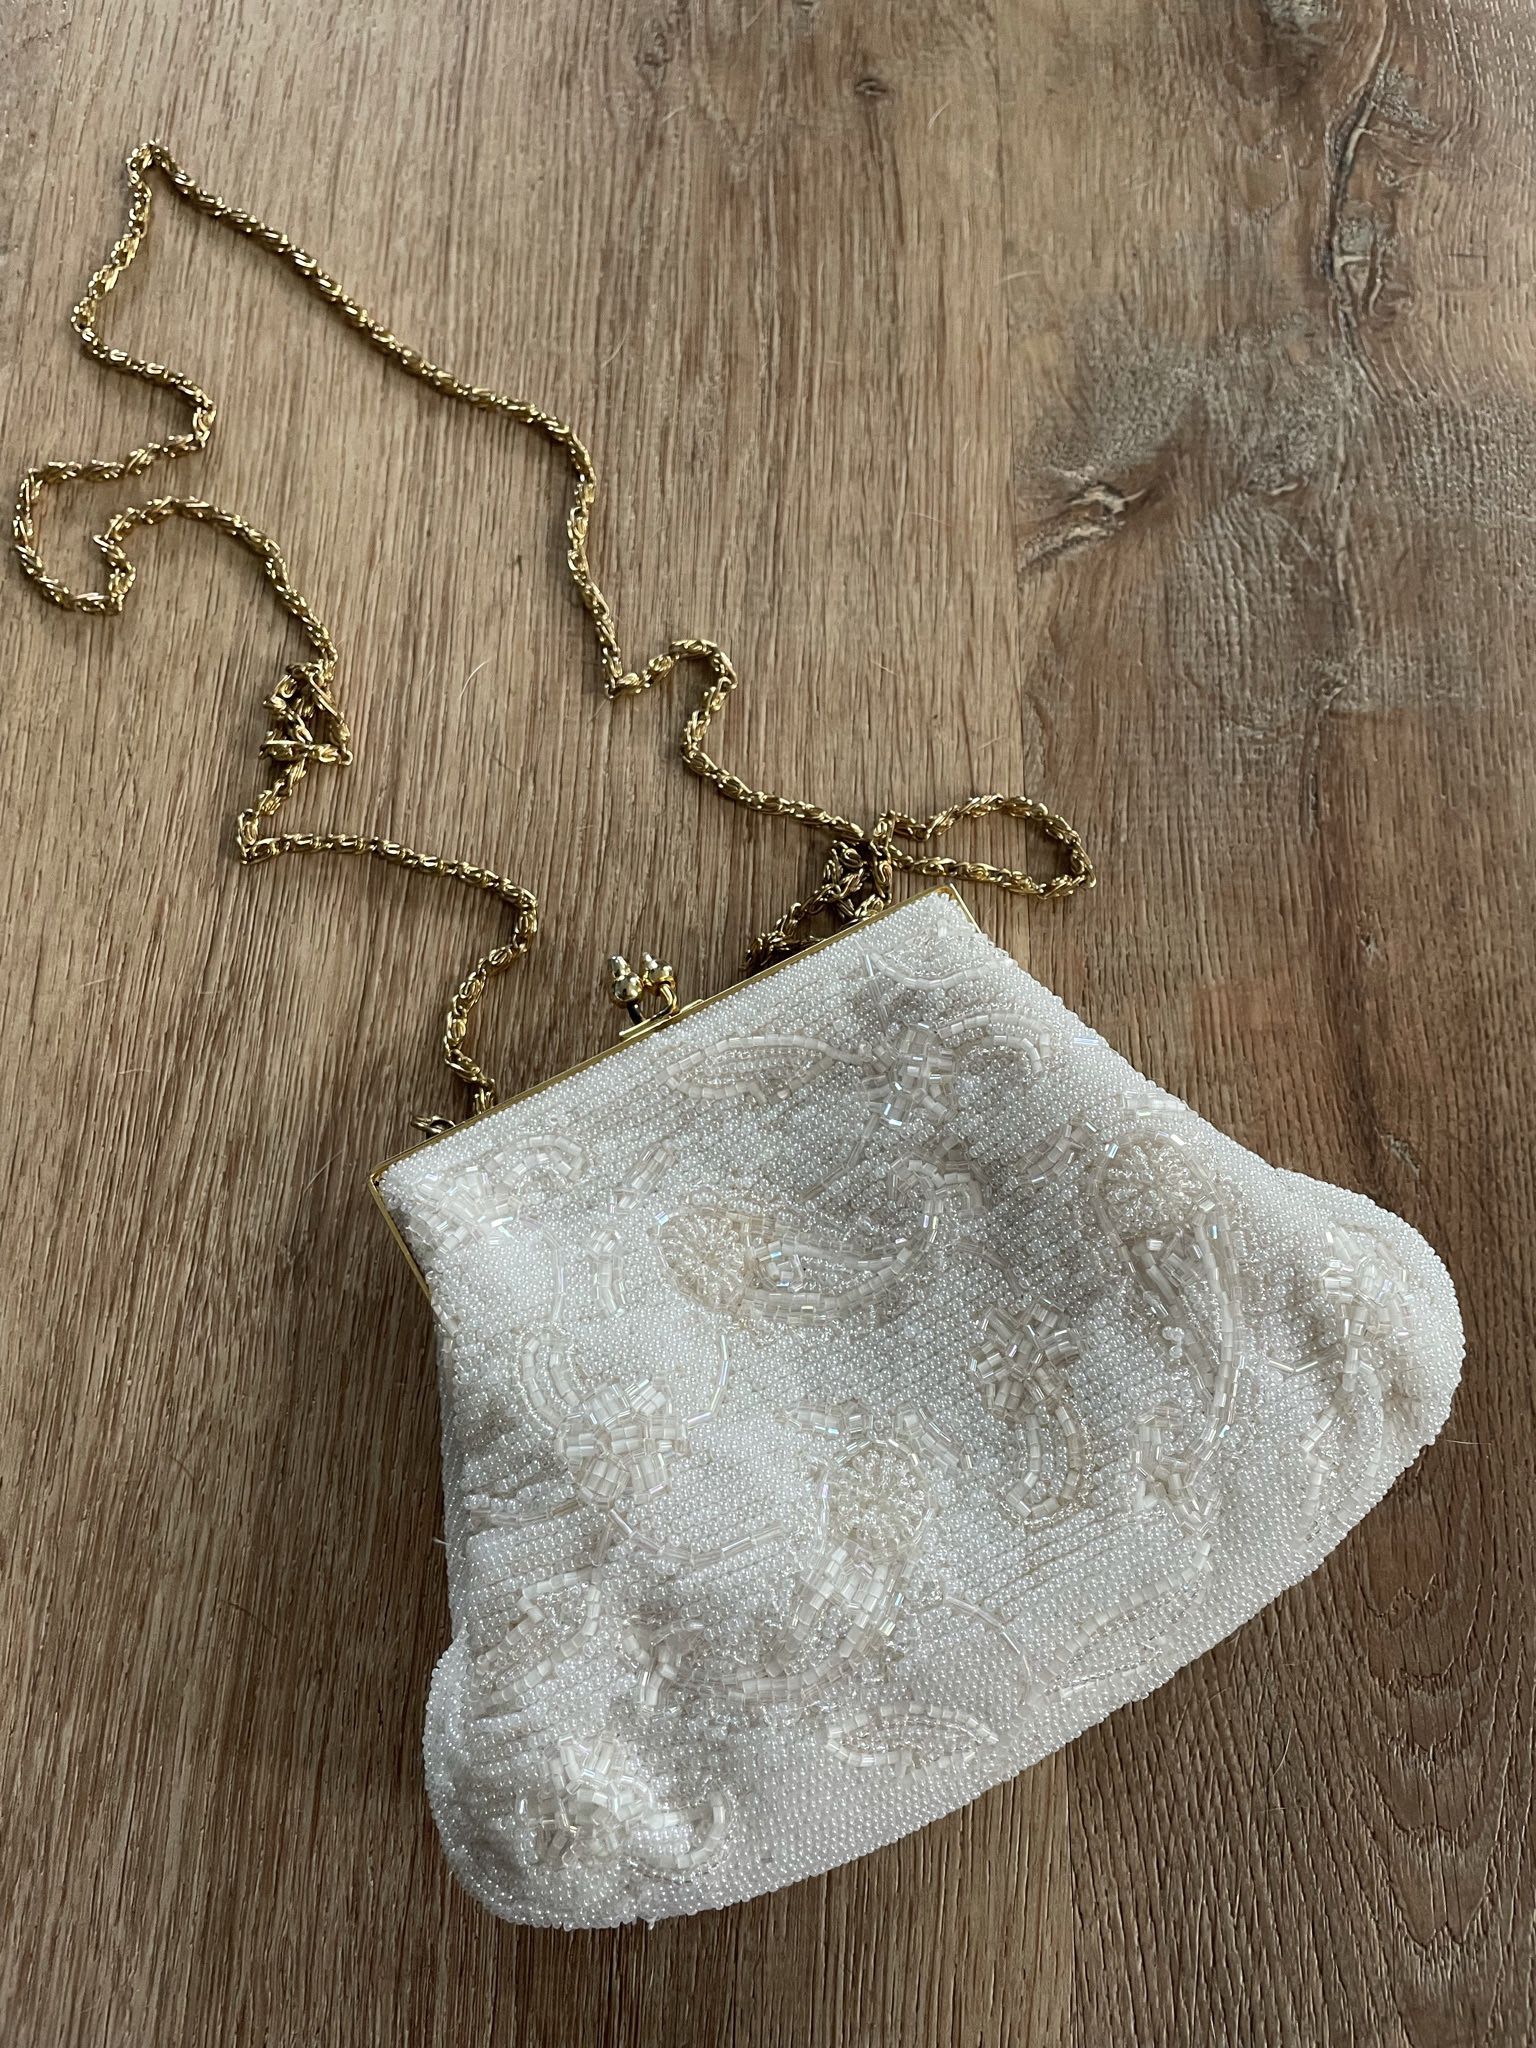 Vintage White Beaded Purse with Gold Chain